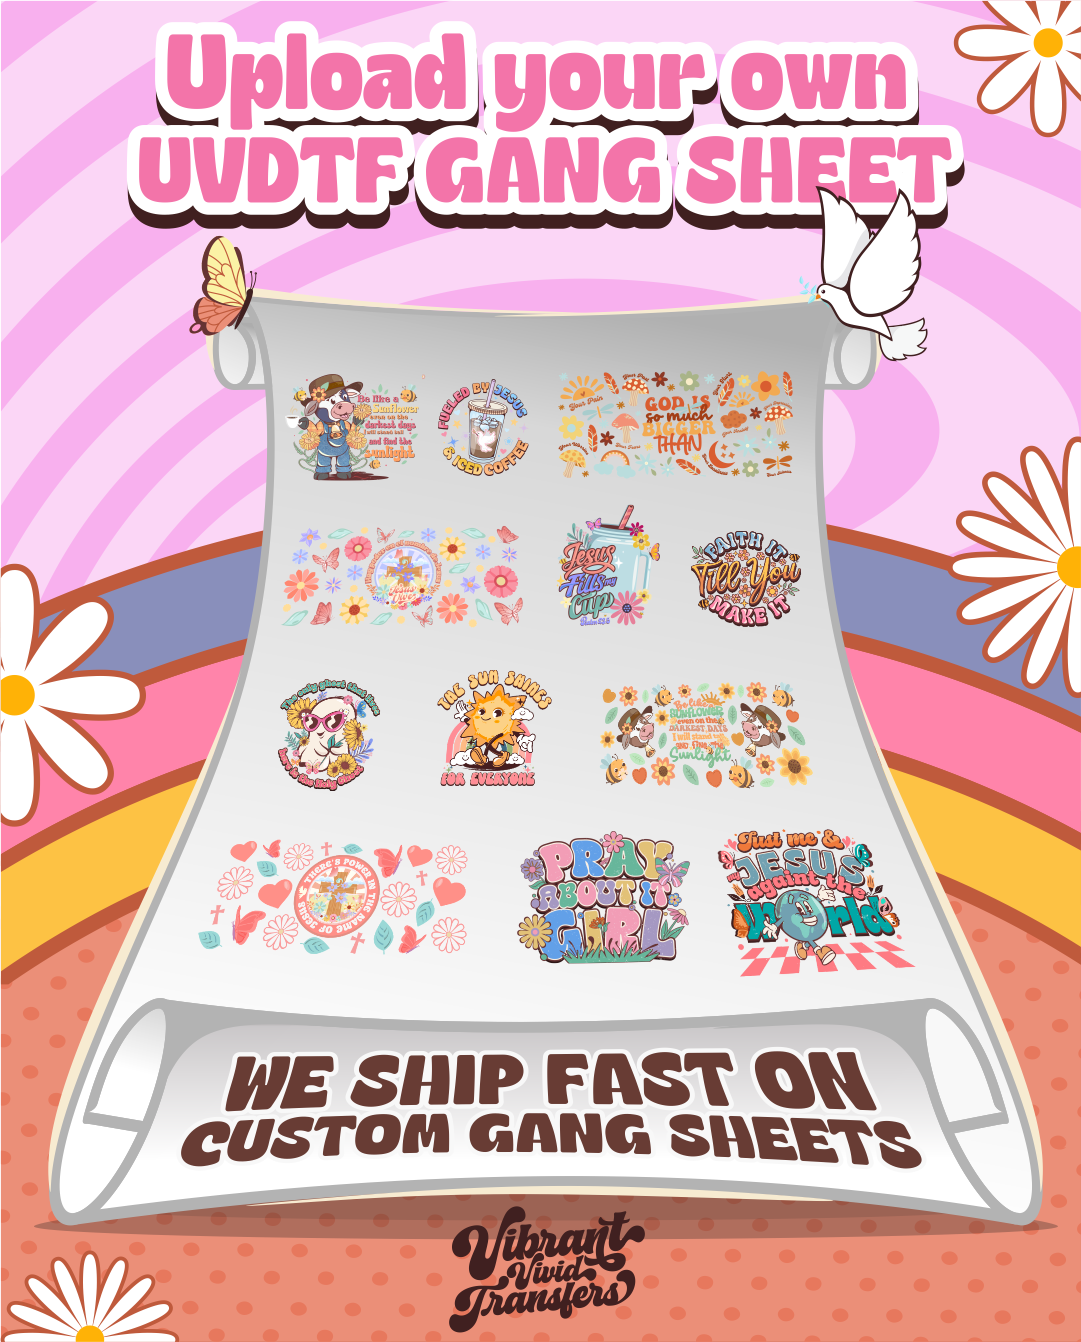 UV DTF TRANSFERS (STICKERS) - UPLOAD GANG SHEETS – modfirstapparel